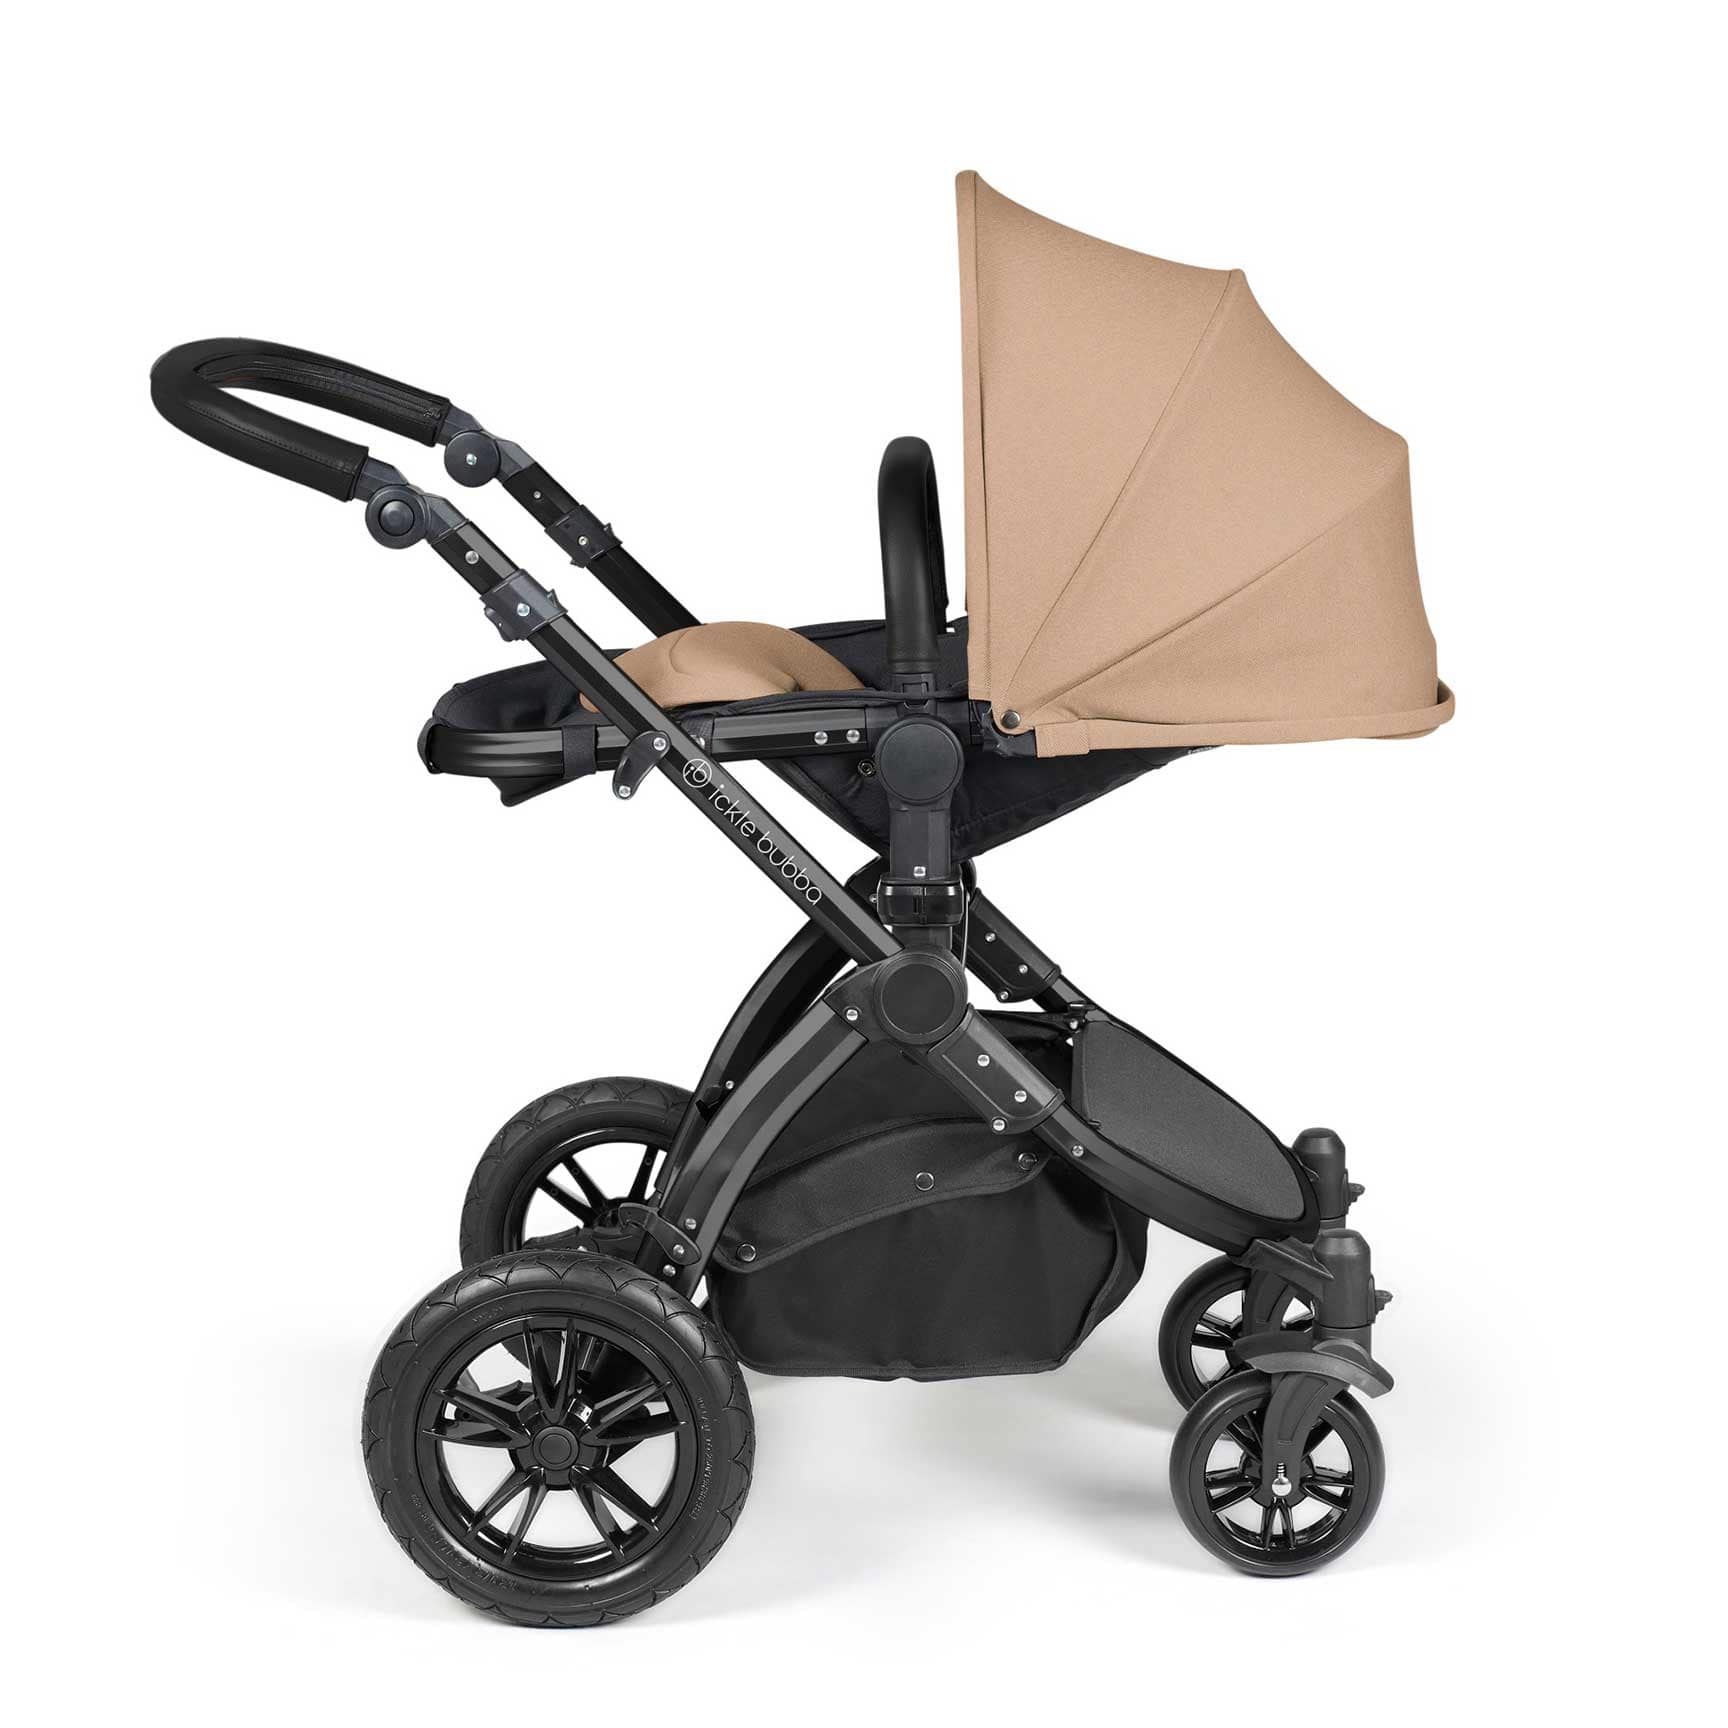 Ickle Bubba Stomp Luxe All-in-One Travel System with Isofix Base in Black/Desert/Black Travel Systems 10-011-300-208 5056515026498